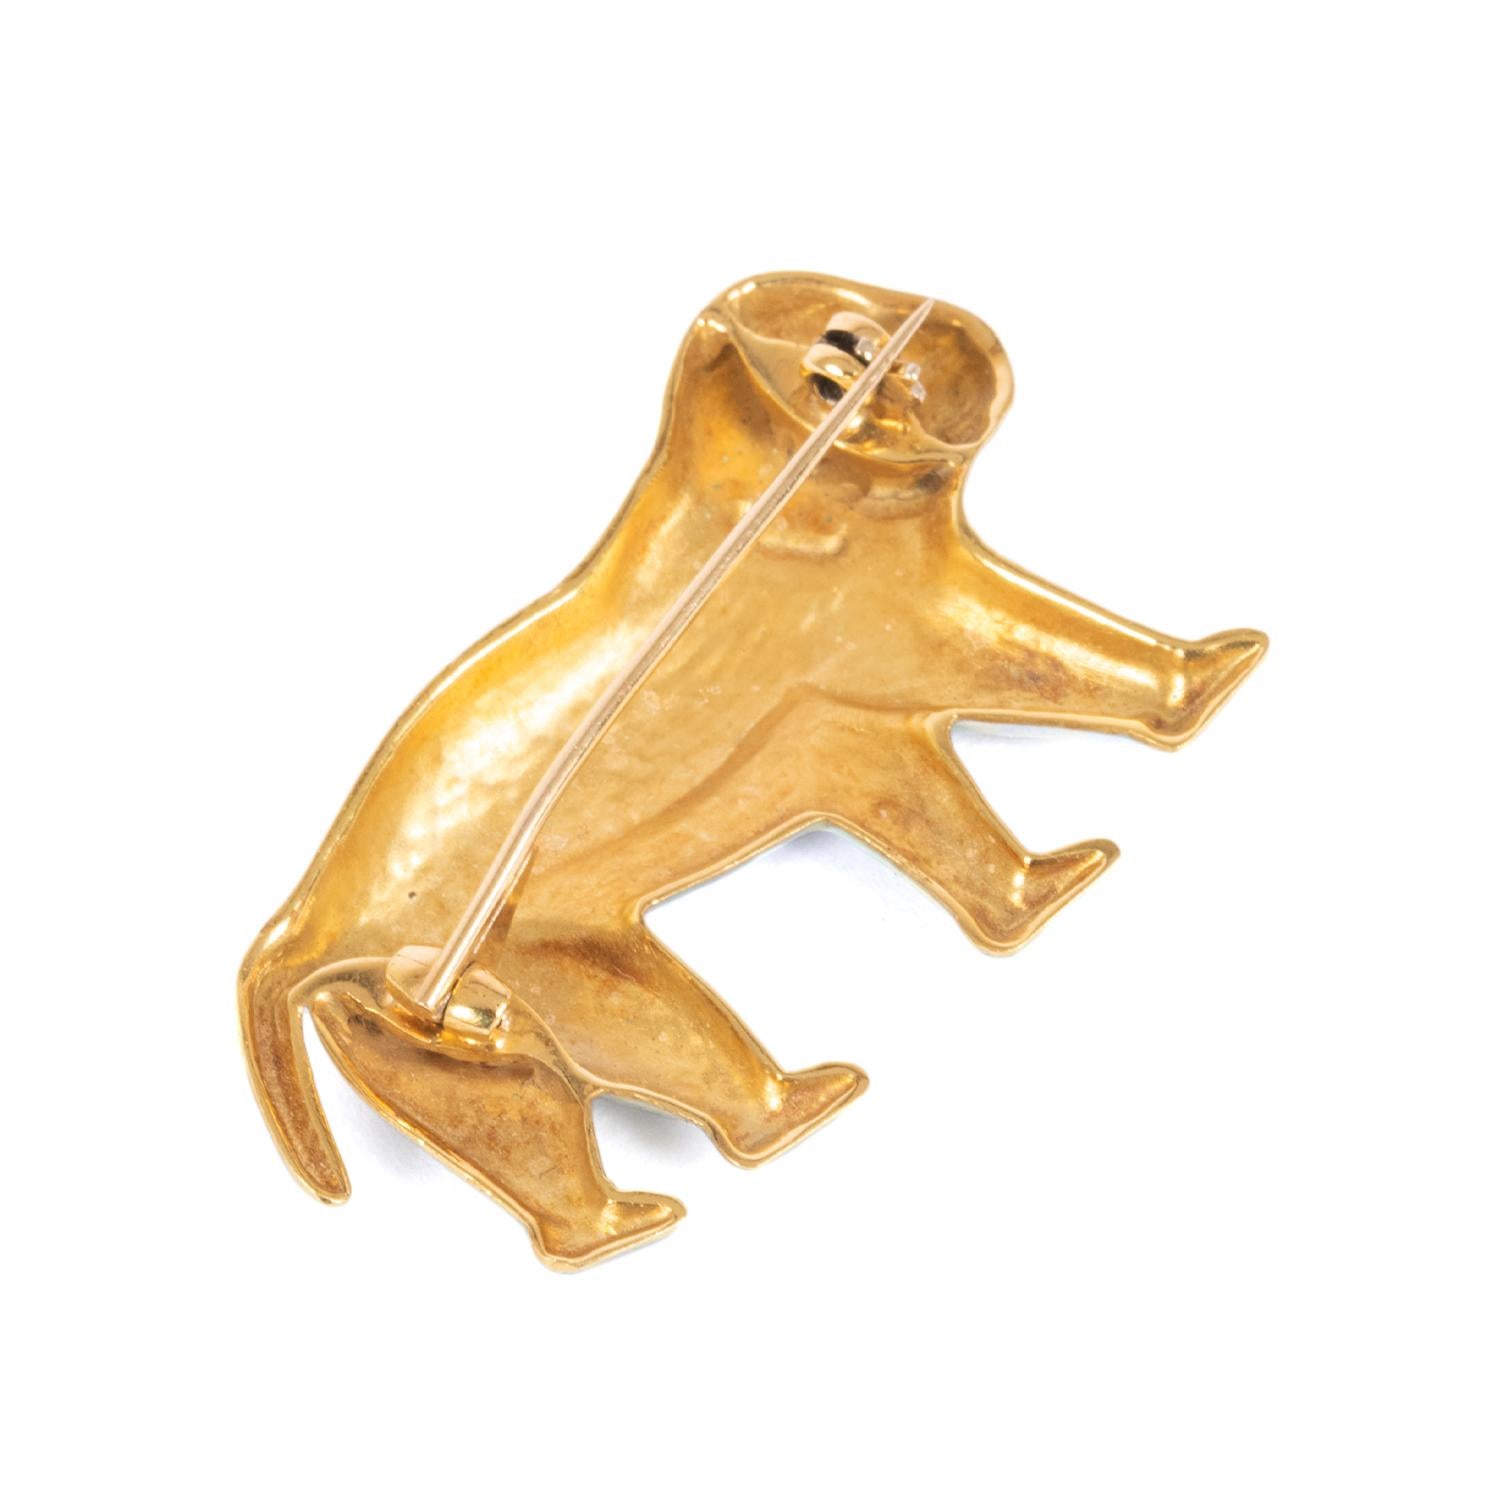 Giancarlo Montebello 18 K Gold Burgundy Enamel Monkey Brooch In New Condition For Sale In Bari, IT